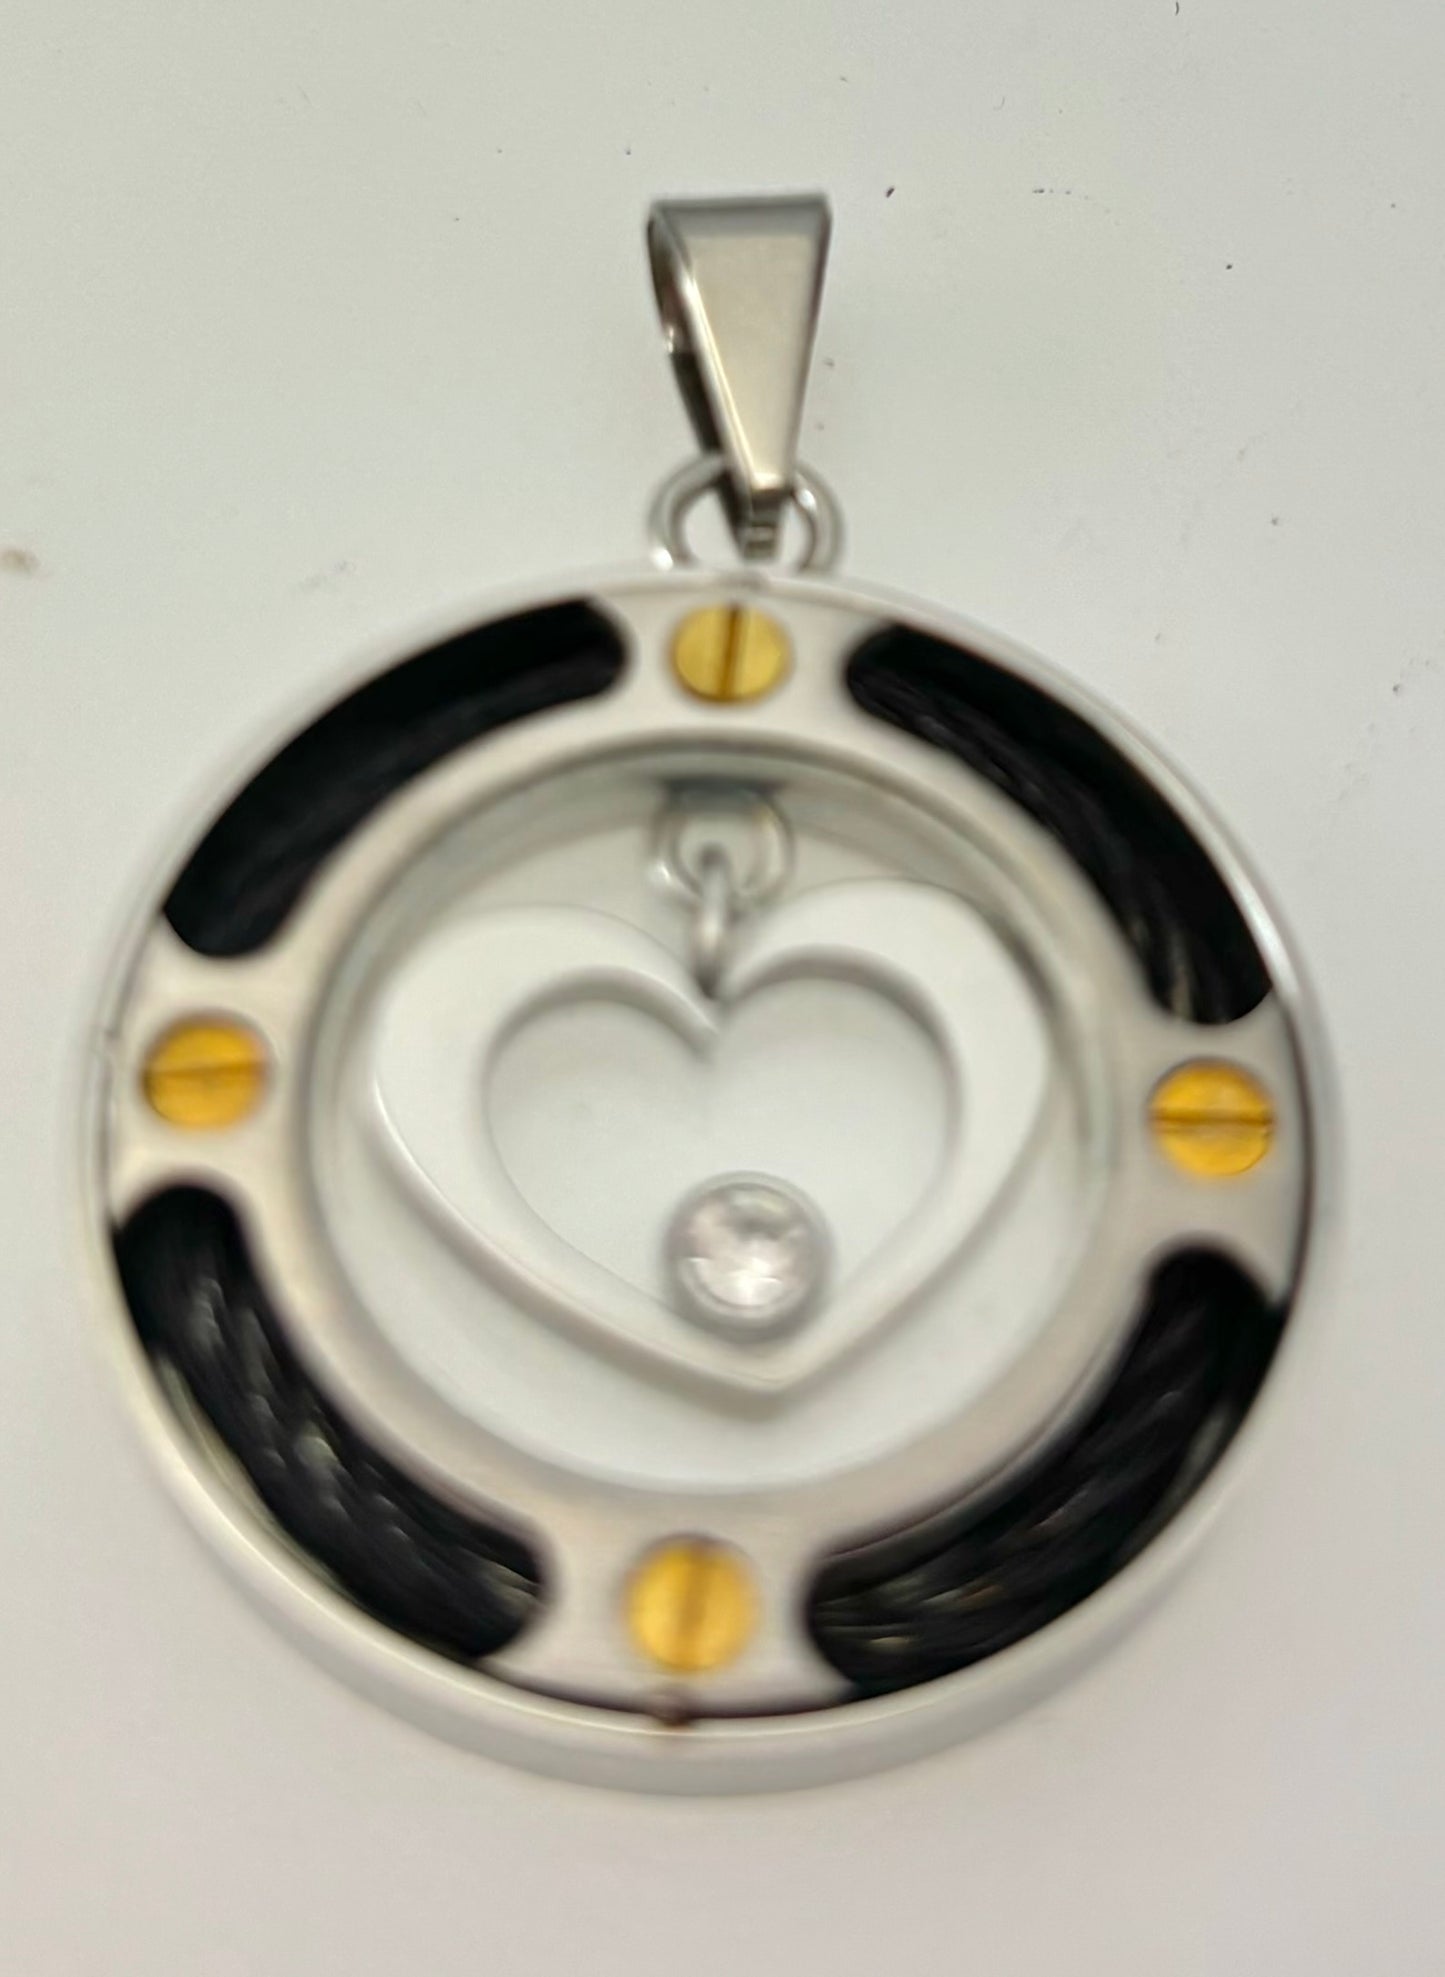 JEWELRY CIRCLE WITH BLACK ENMEL AND HEART IN CENTER